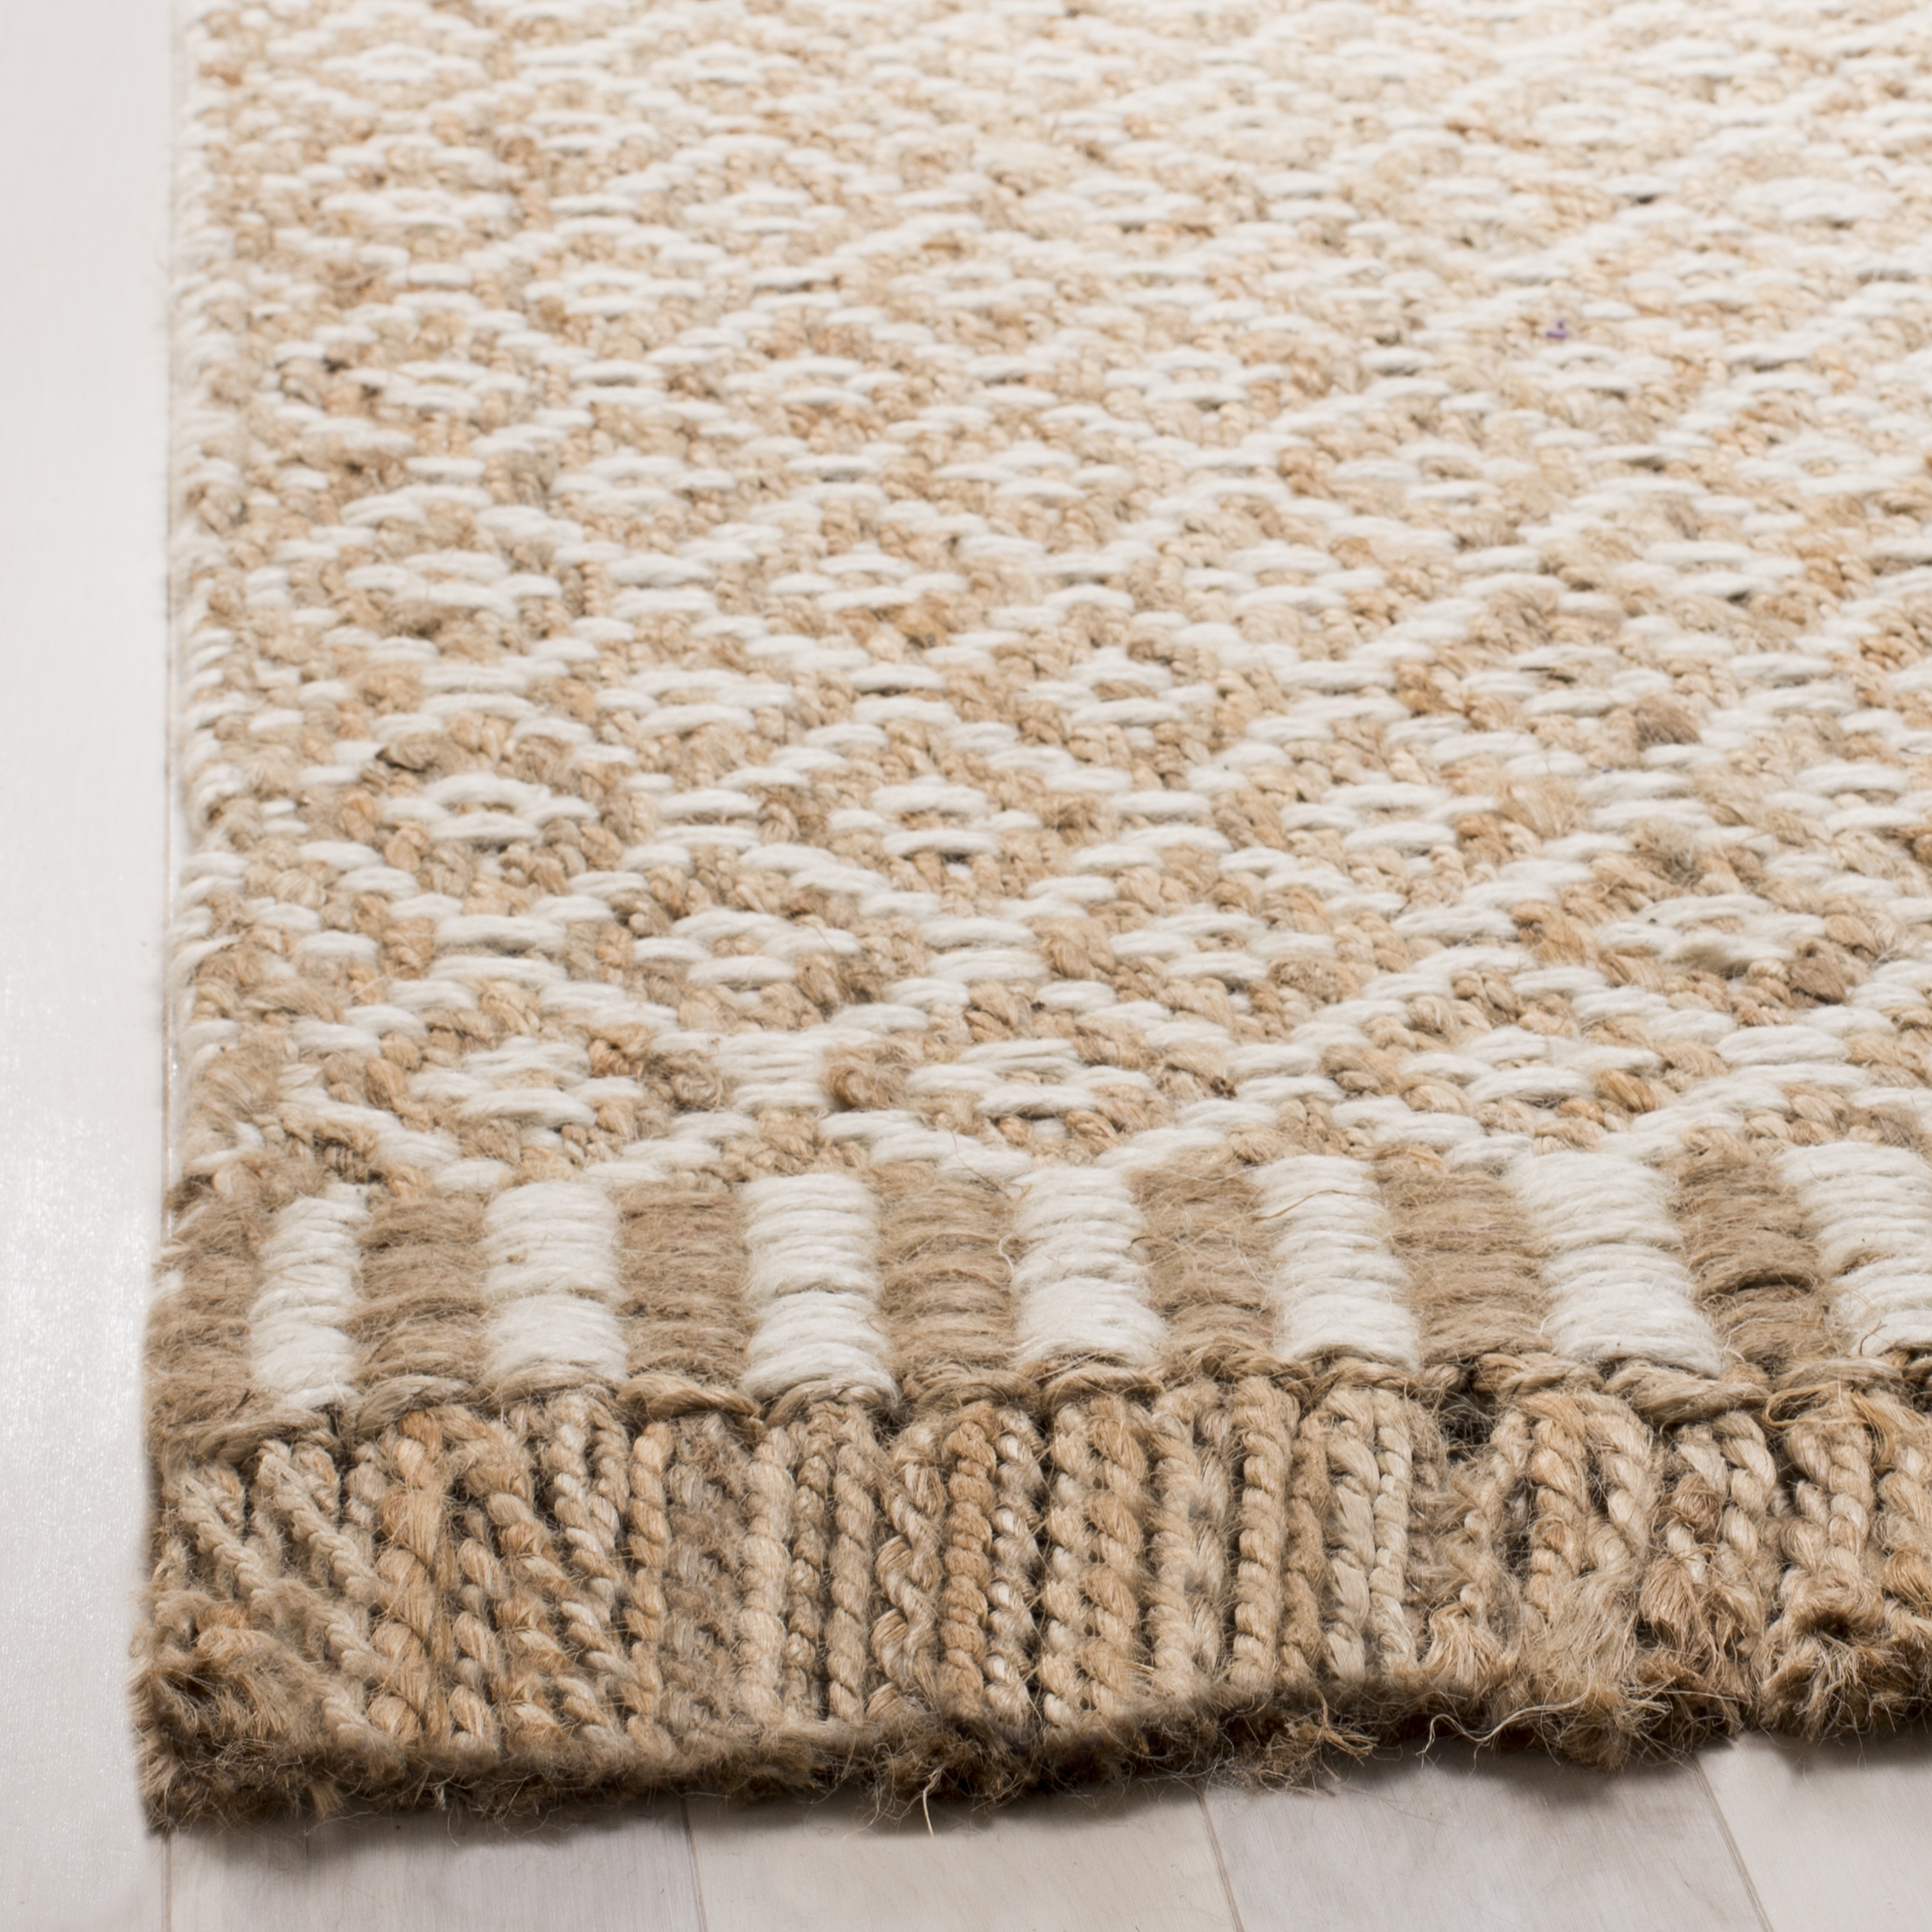 Arlo Home Hand Woven Area Rug, NF182A, Natural/Ivory,  5' X 8' - Image 2